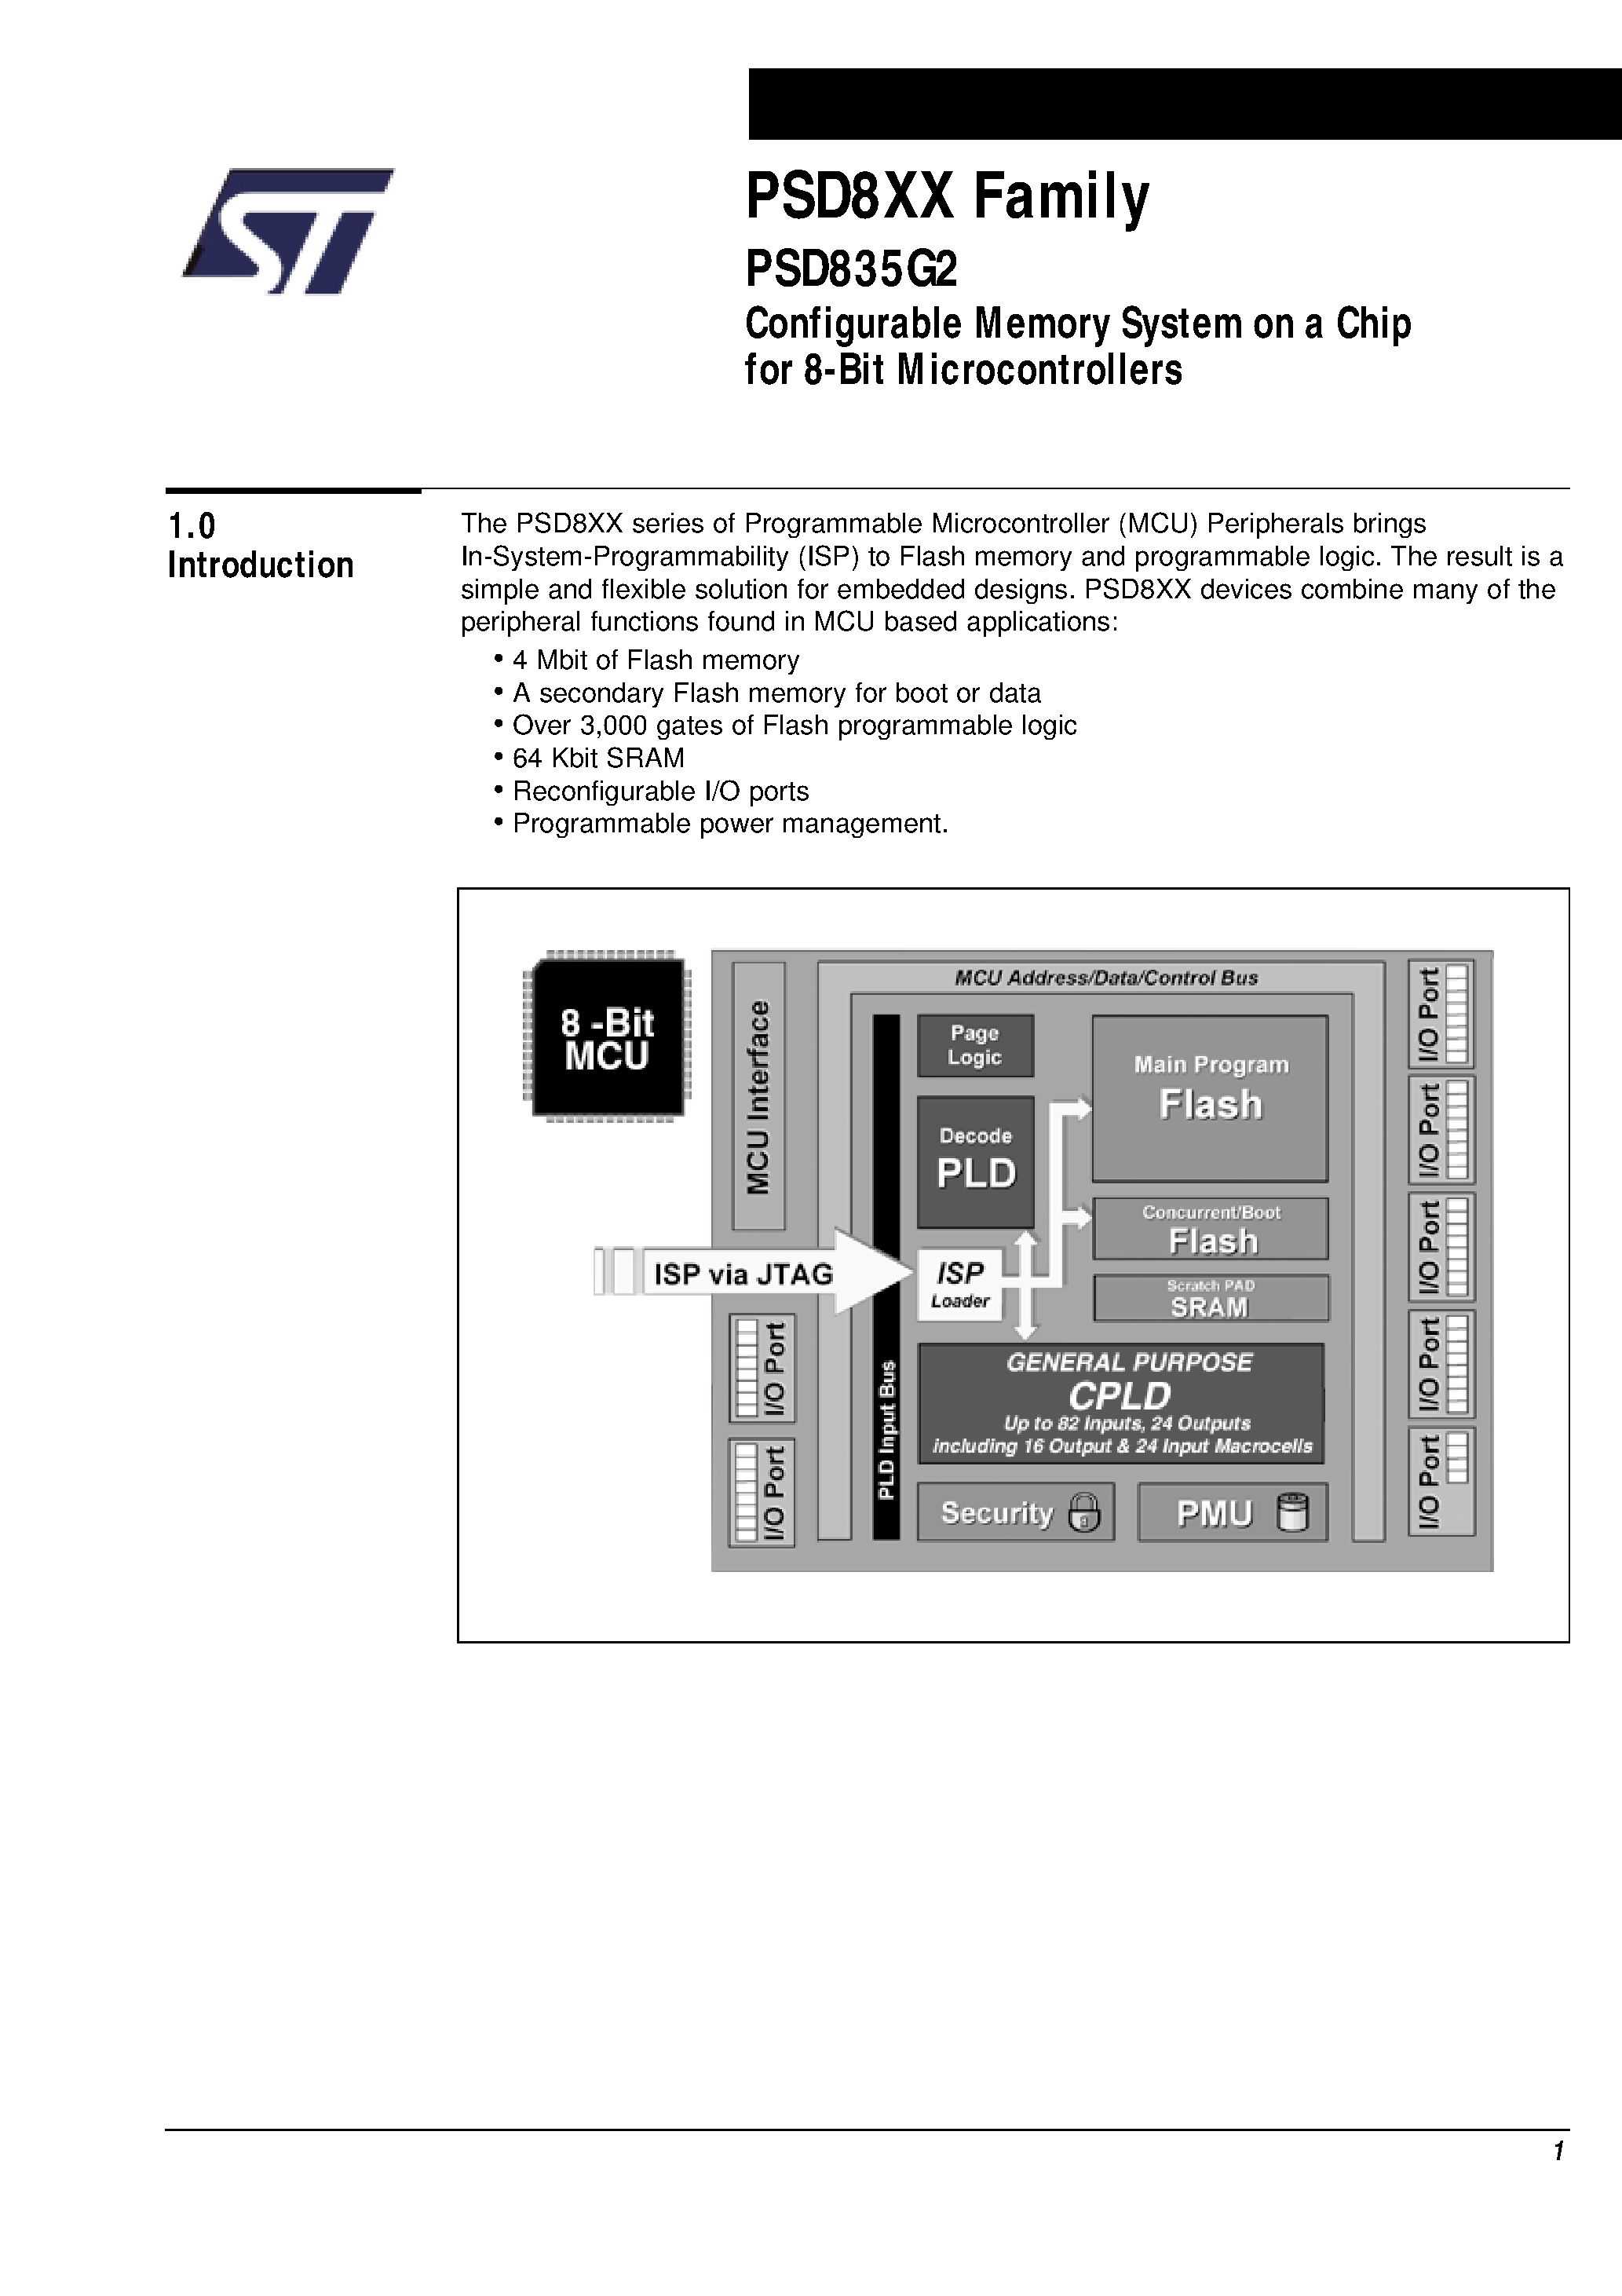 Datasheet PSD835F2V-A-12M - Configurable Memory System on a Chip for 8-Bit Microcontrollers page 2